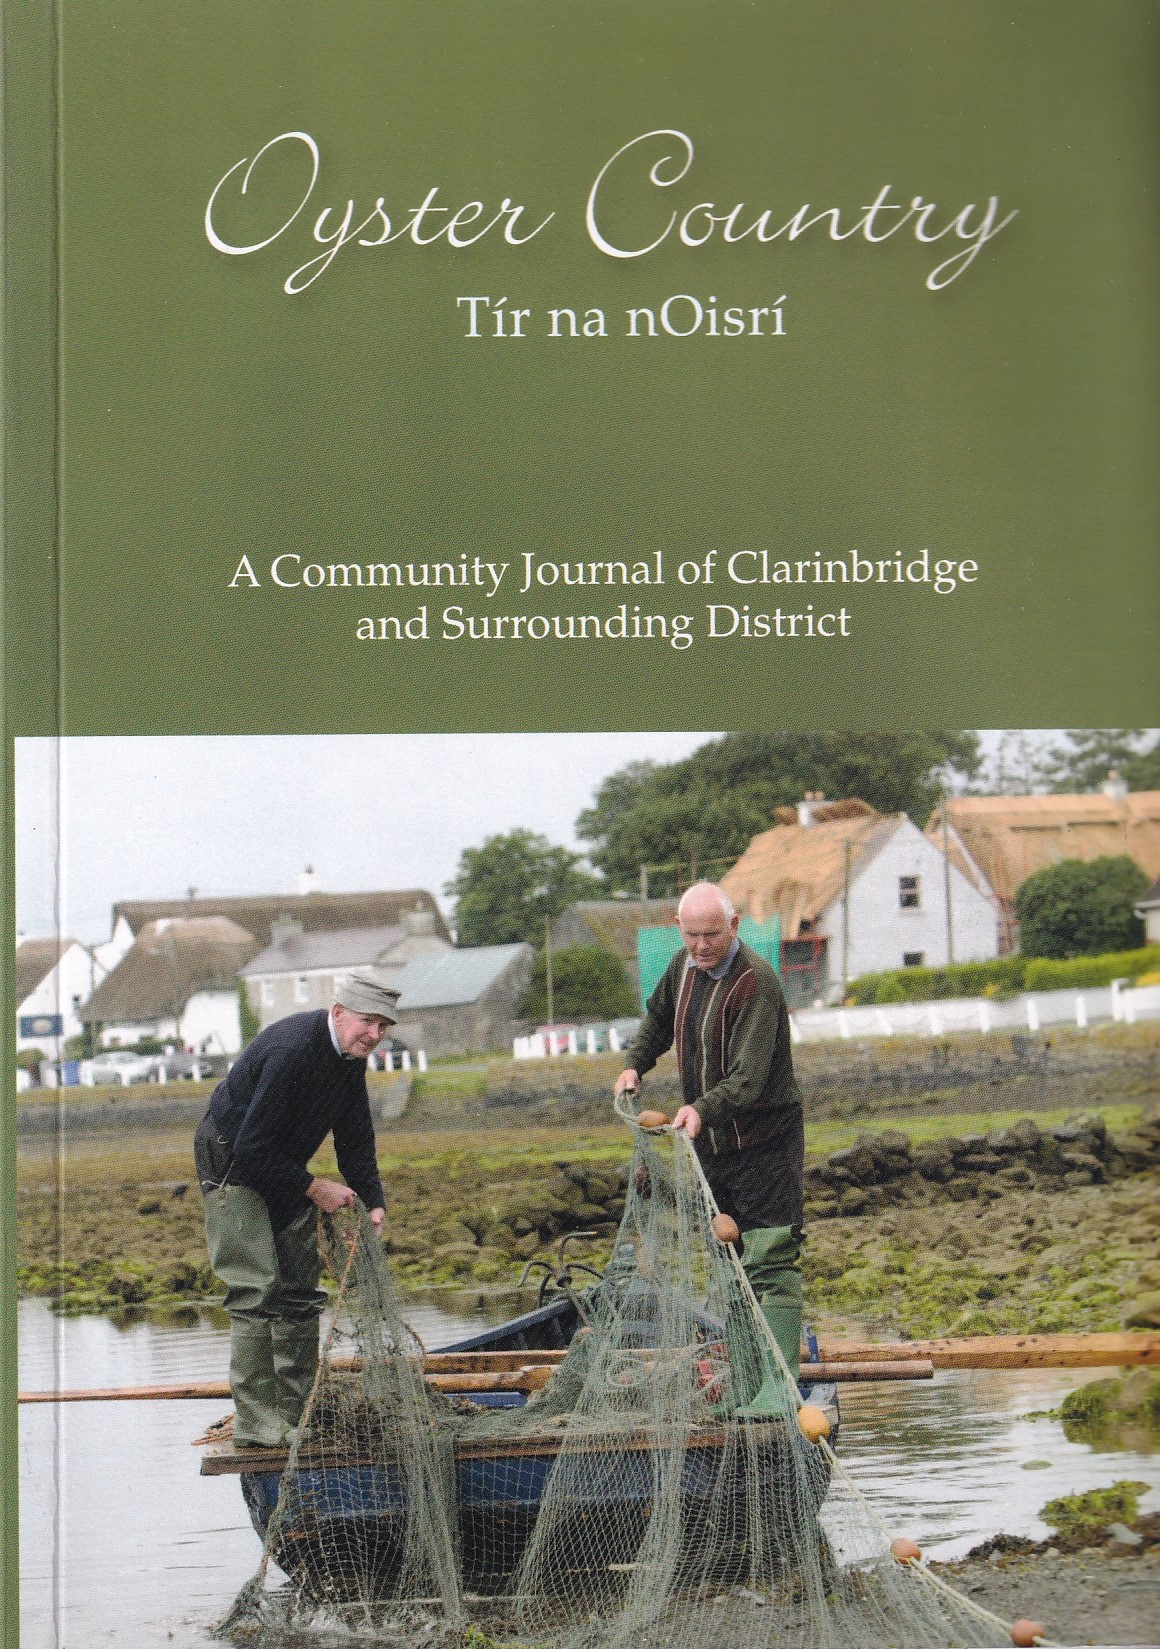 Oyster Country (Tír na nOisrí): A Community Journal of Clarinbridge and Surrounding District by Joseph Murphy